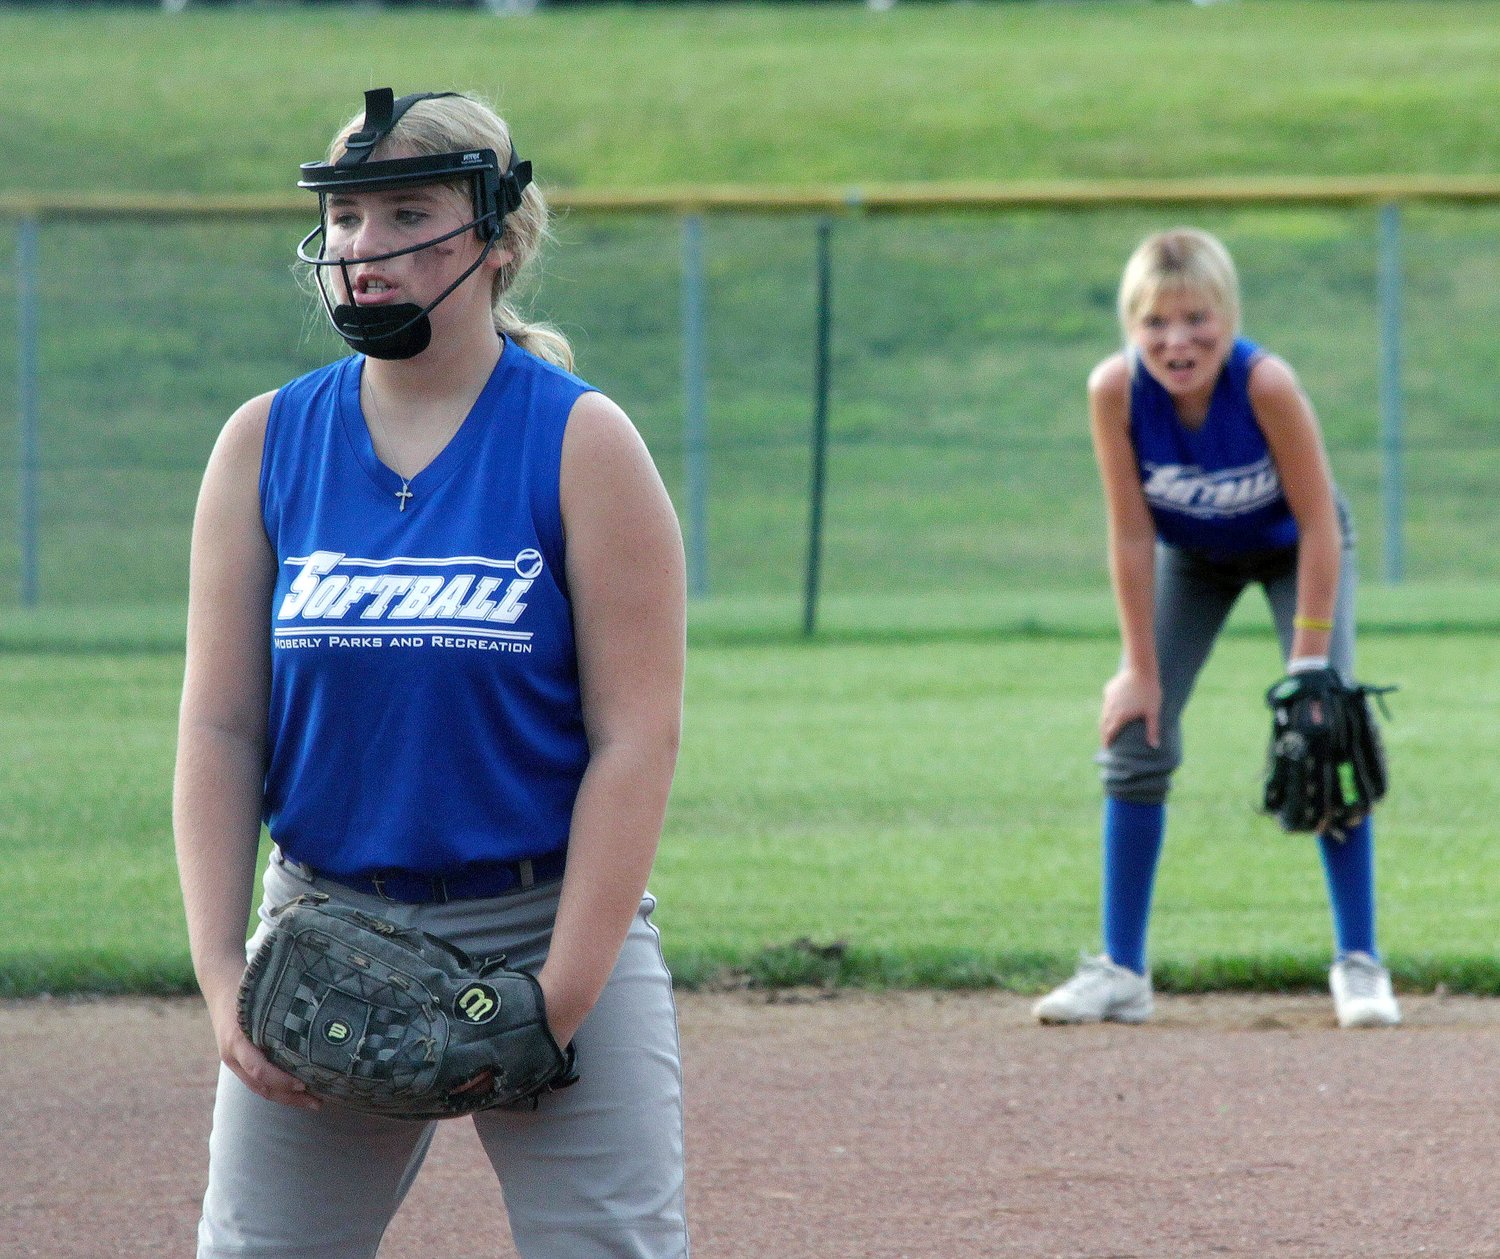 Moberly No. 2 age 12U girls softball team first baseman Kamryn Fallaw and right fielder Jerzee Bruce prepare to field a potential batted softball Wednesday during a Moberly Parks &amp; Recreation Department league game played at the Howard Hils Athletic Complex. Moberly No. 2 girls edged Centralia 8-6 in three innings.